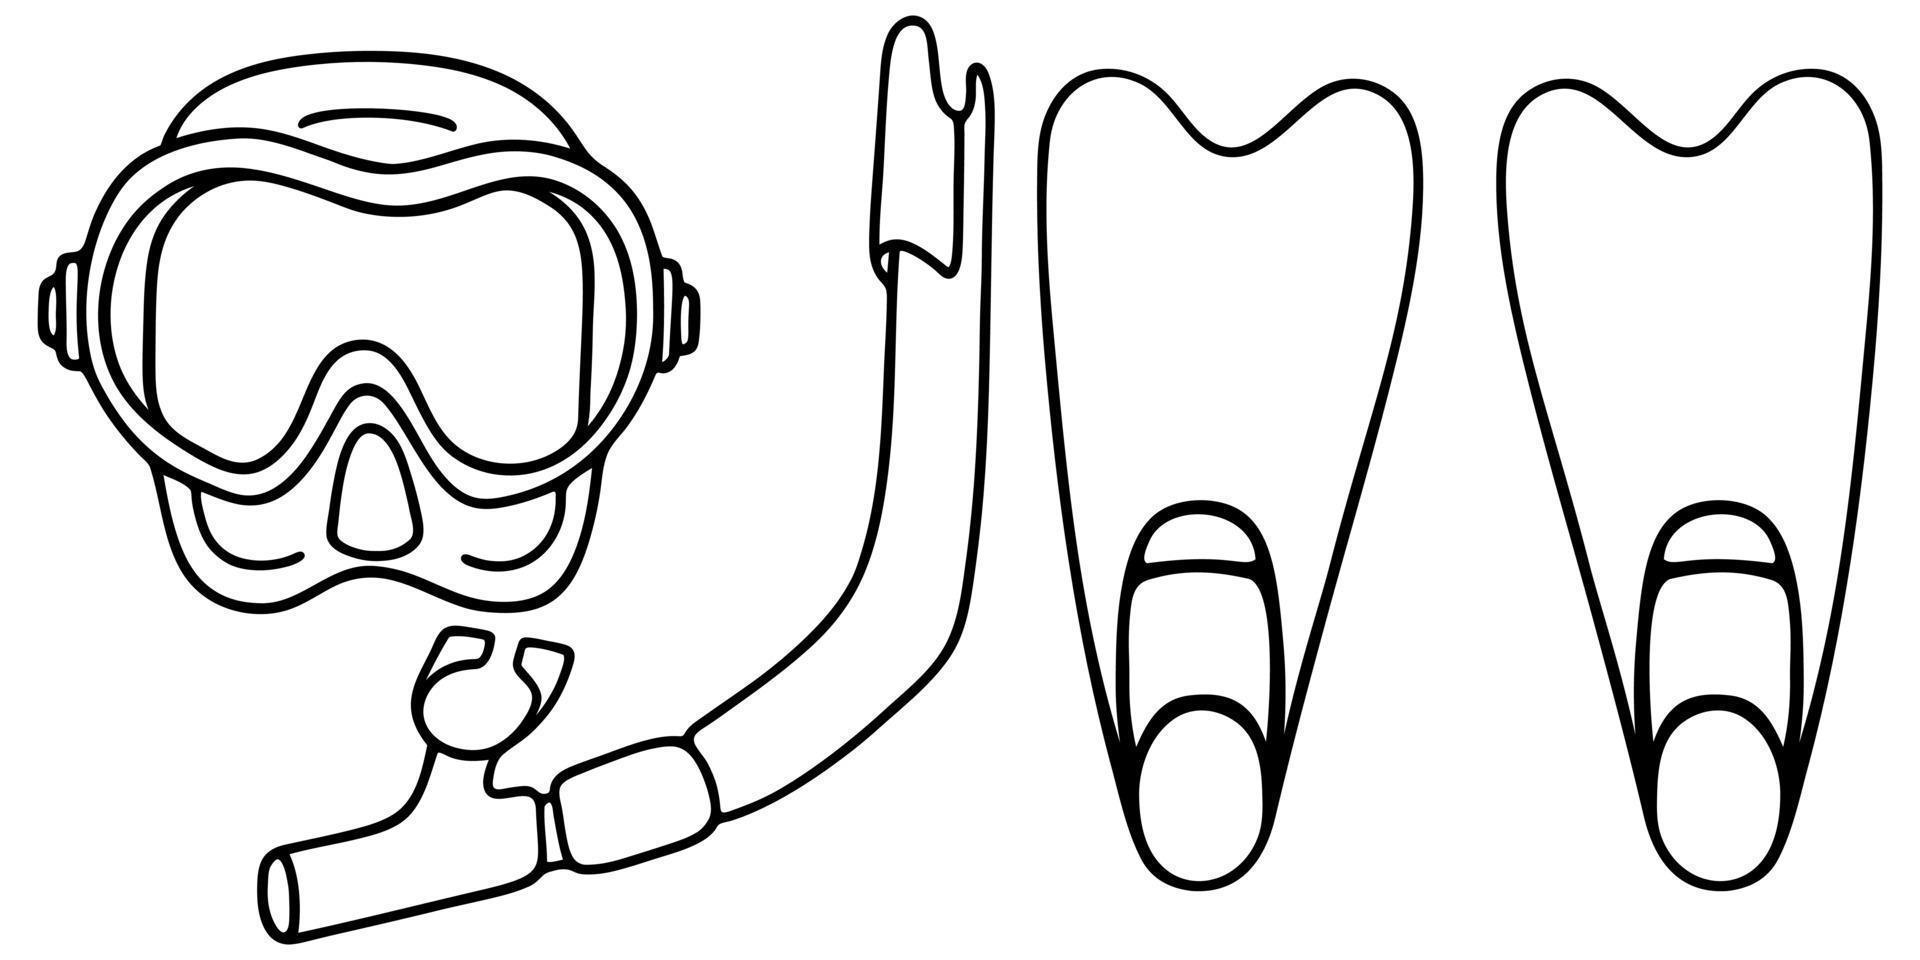 Mask, snorkel and diving fins. Vector set of illustrations. Outline on an isolated white background. Doodle style. Sketch. Equipment for swimming under the surface of the water. Special accessories.